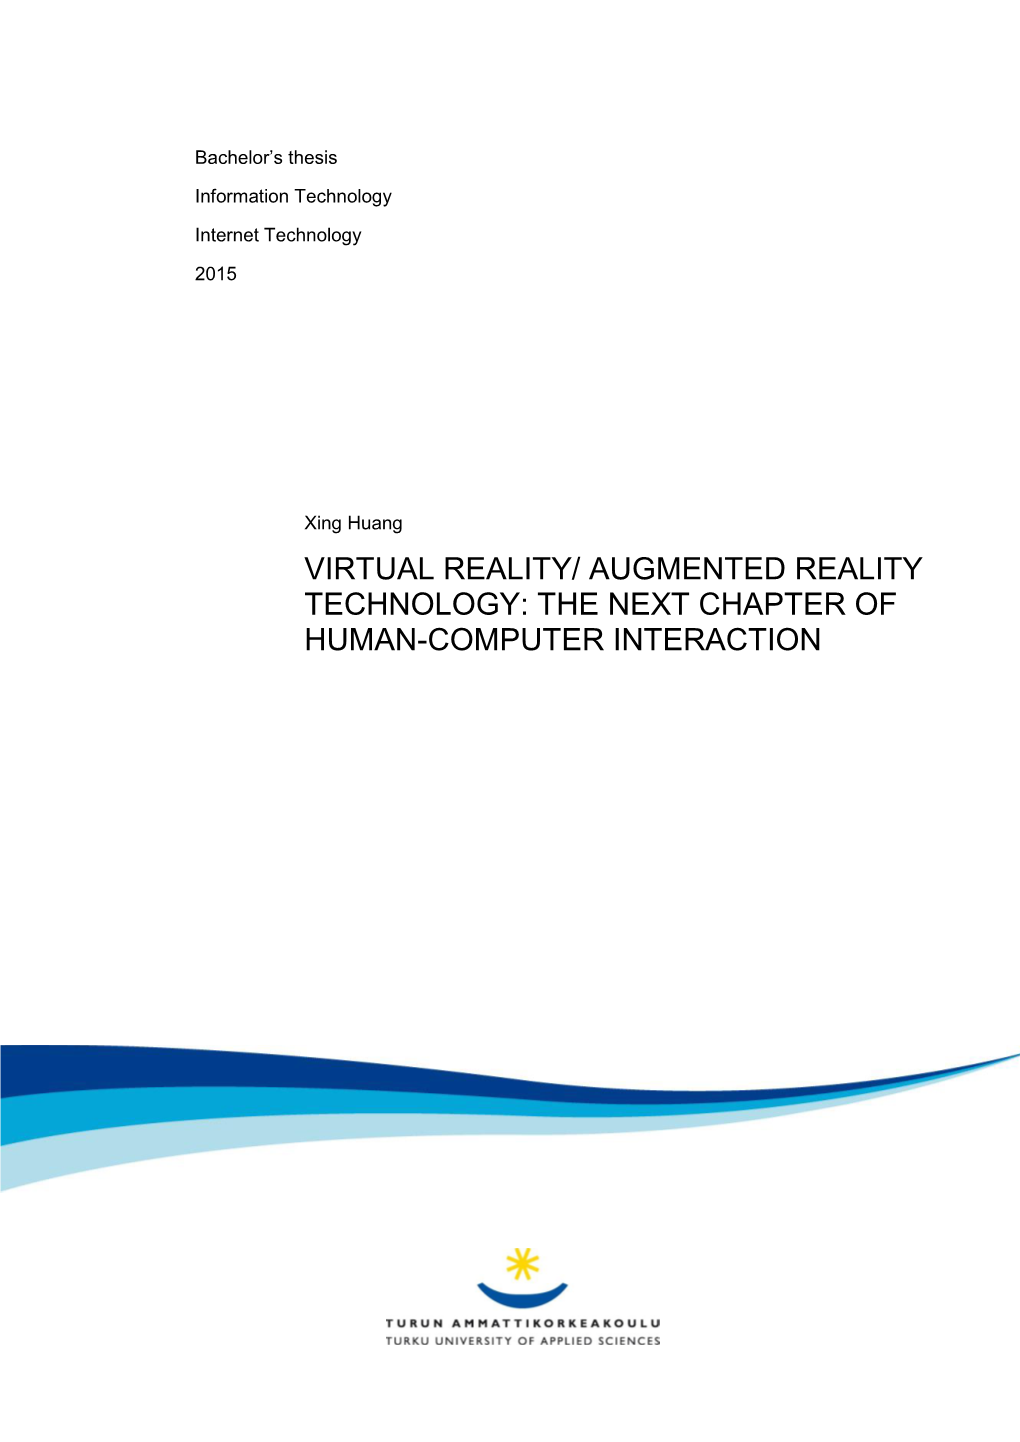 Virtual Reality/ Augmented Reality Technology: the Next Chapter of Human-Computer Interaction